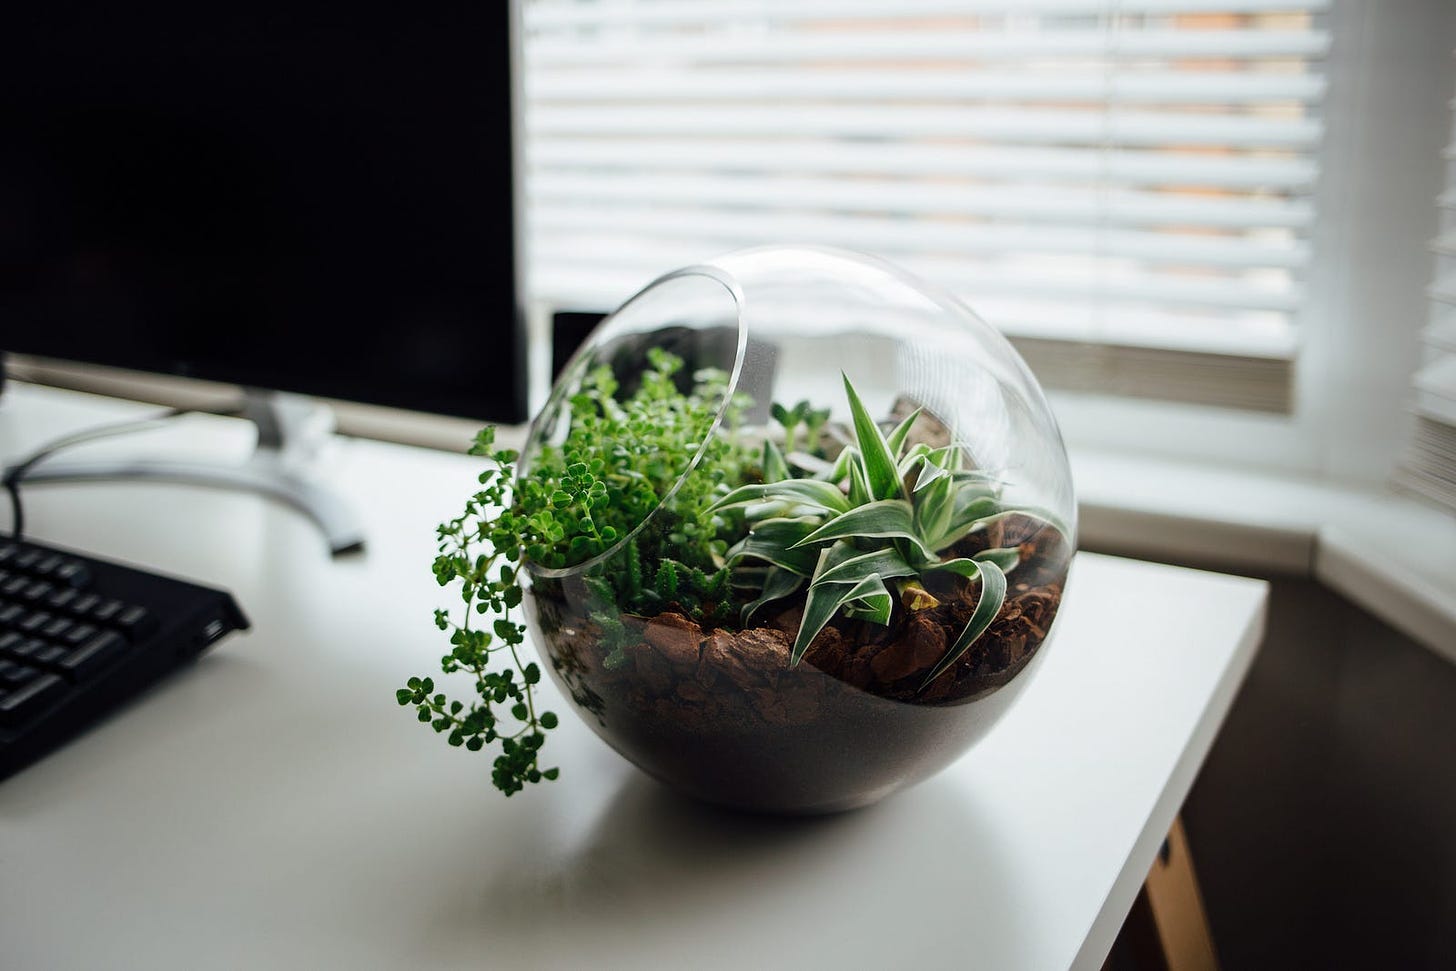 Pot plant in a spherical glass holder on a white desk with a black screen and keyboard